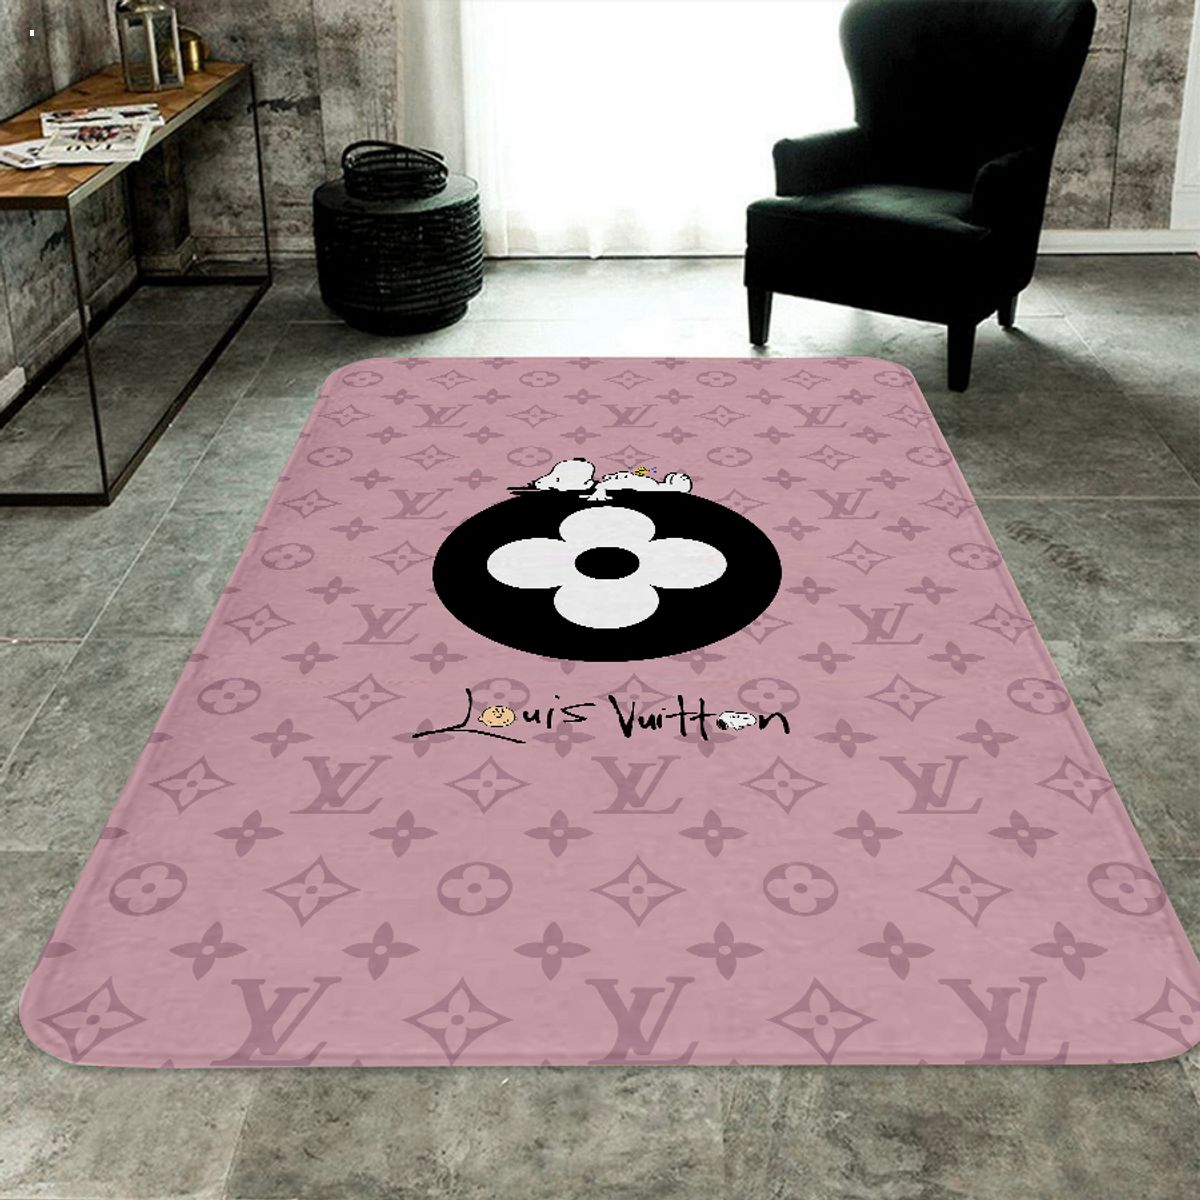 Louis Vuitton Snoopy Luxury Brand Carpet Rug Limited Edition